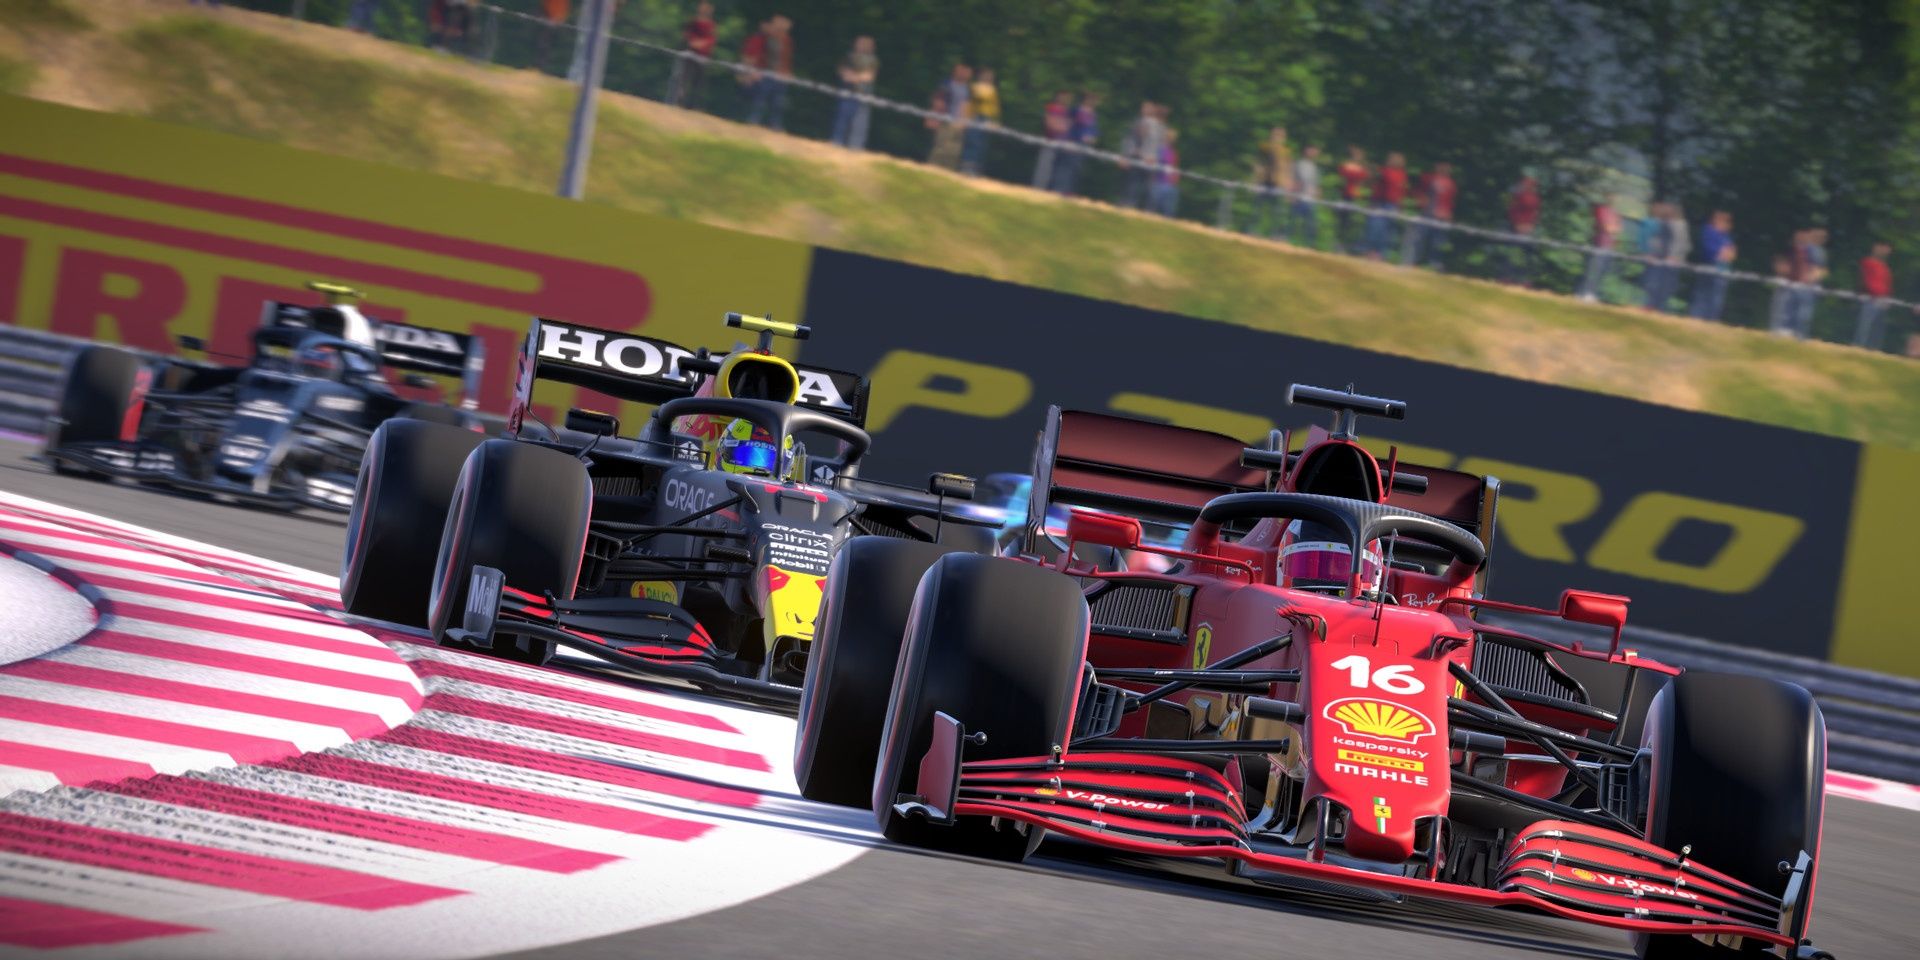 A screenshot showing gameplay in F1 2021